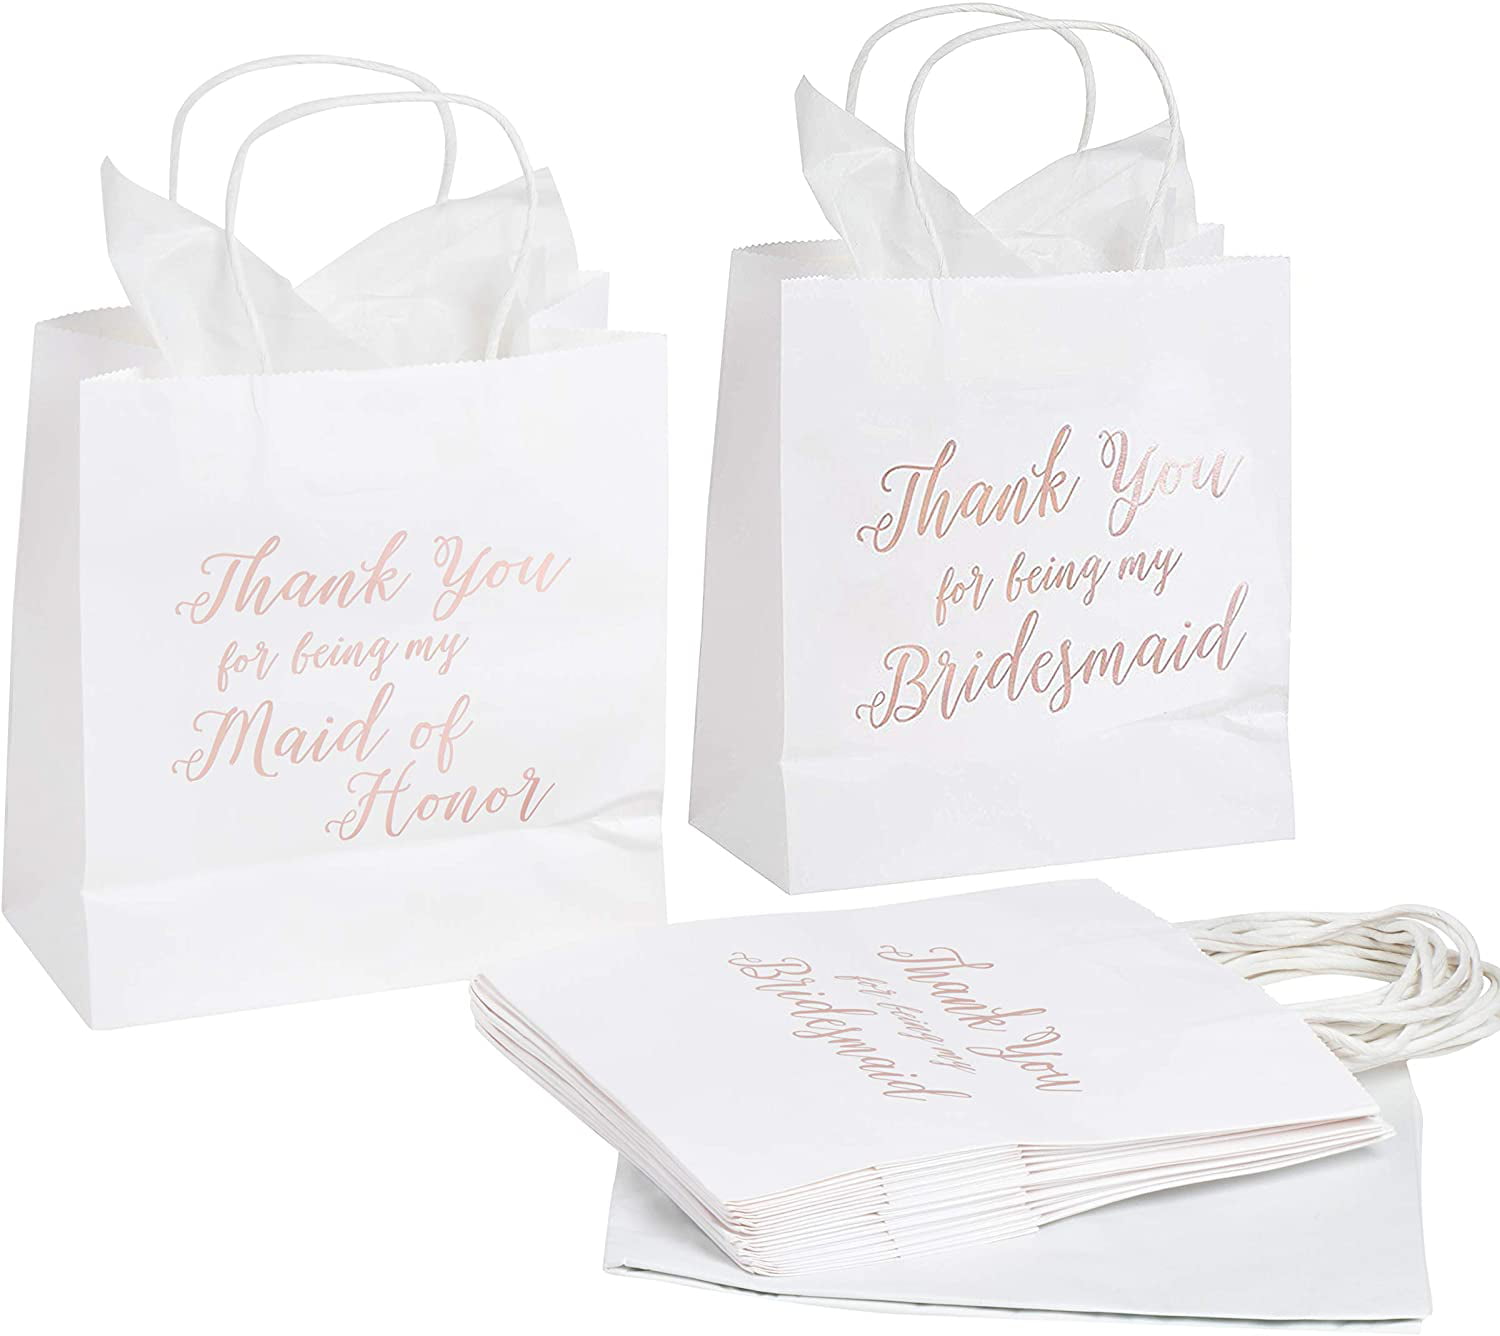 9x8x4 In, 12 Pack Rose Gold Foil Bridesmaid Thank You Gift Bags with Tissue Paper